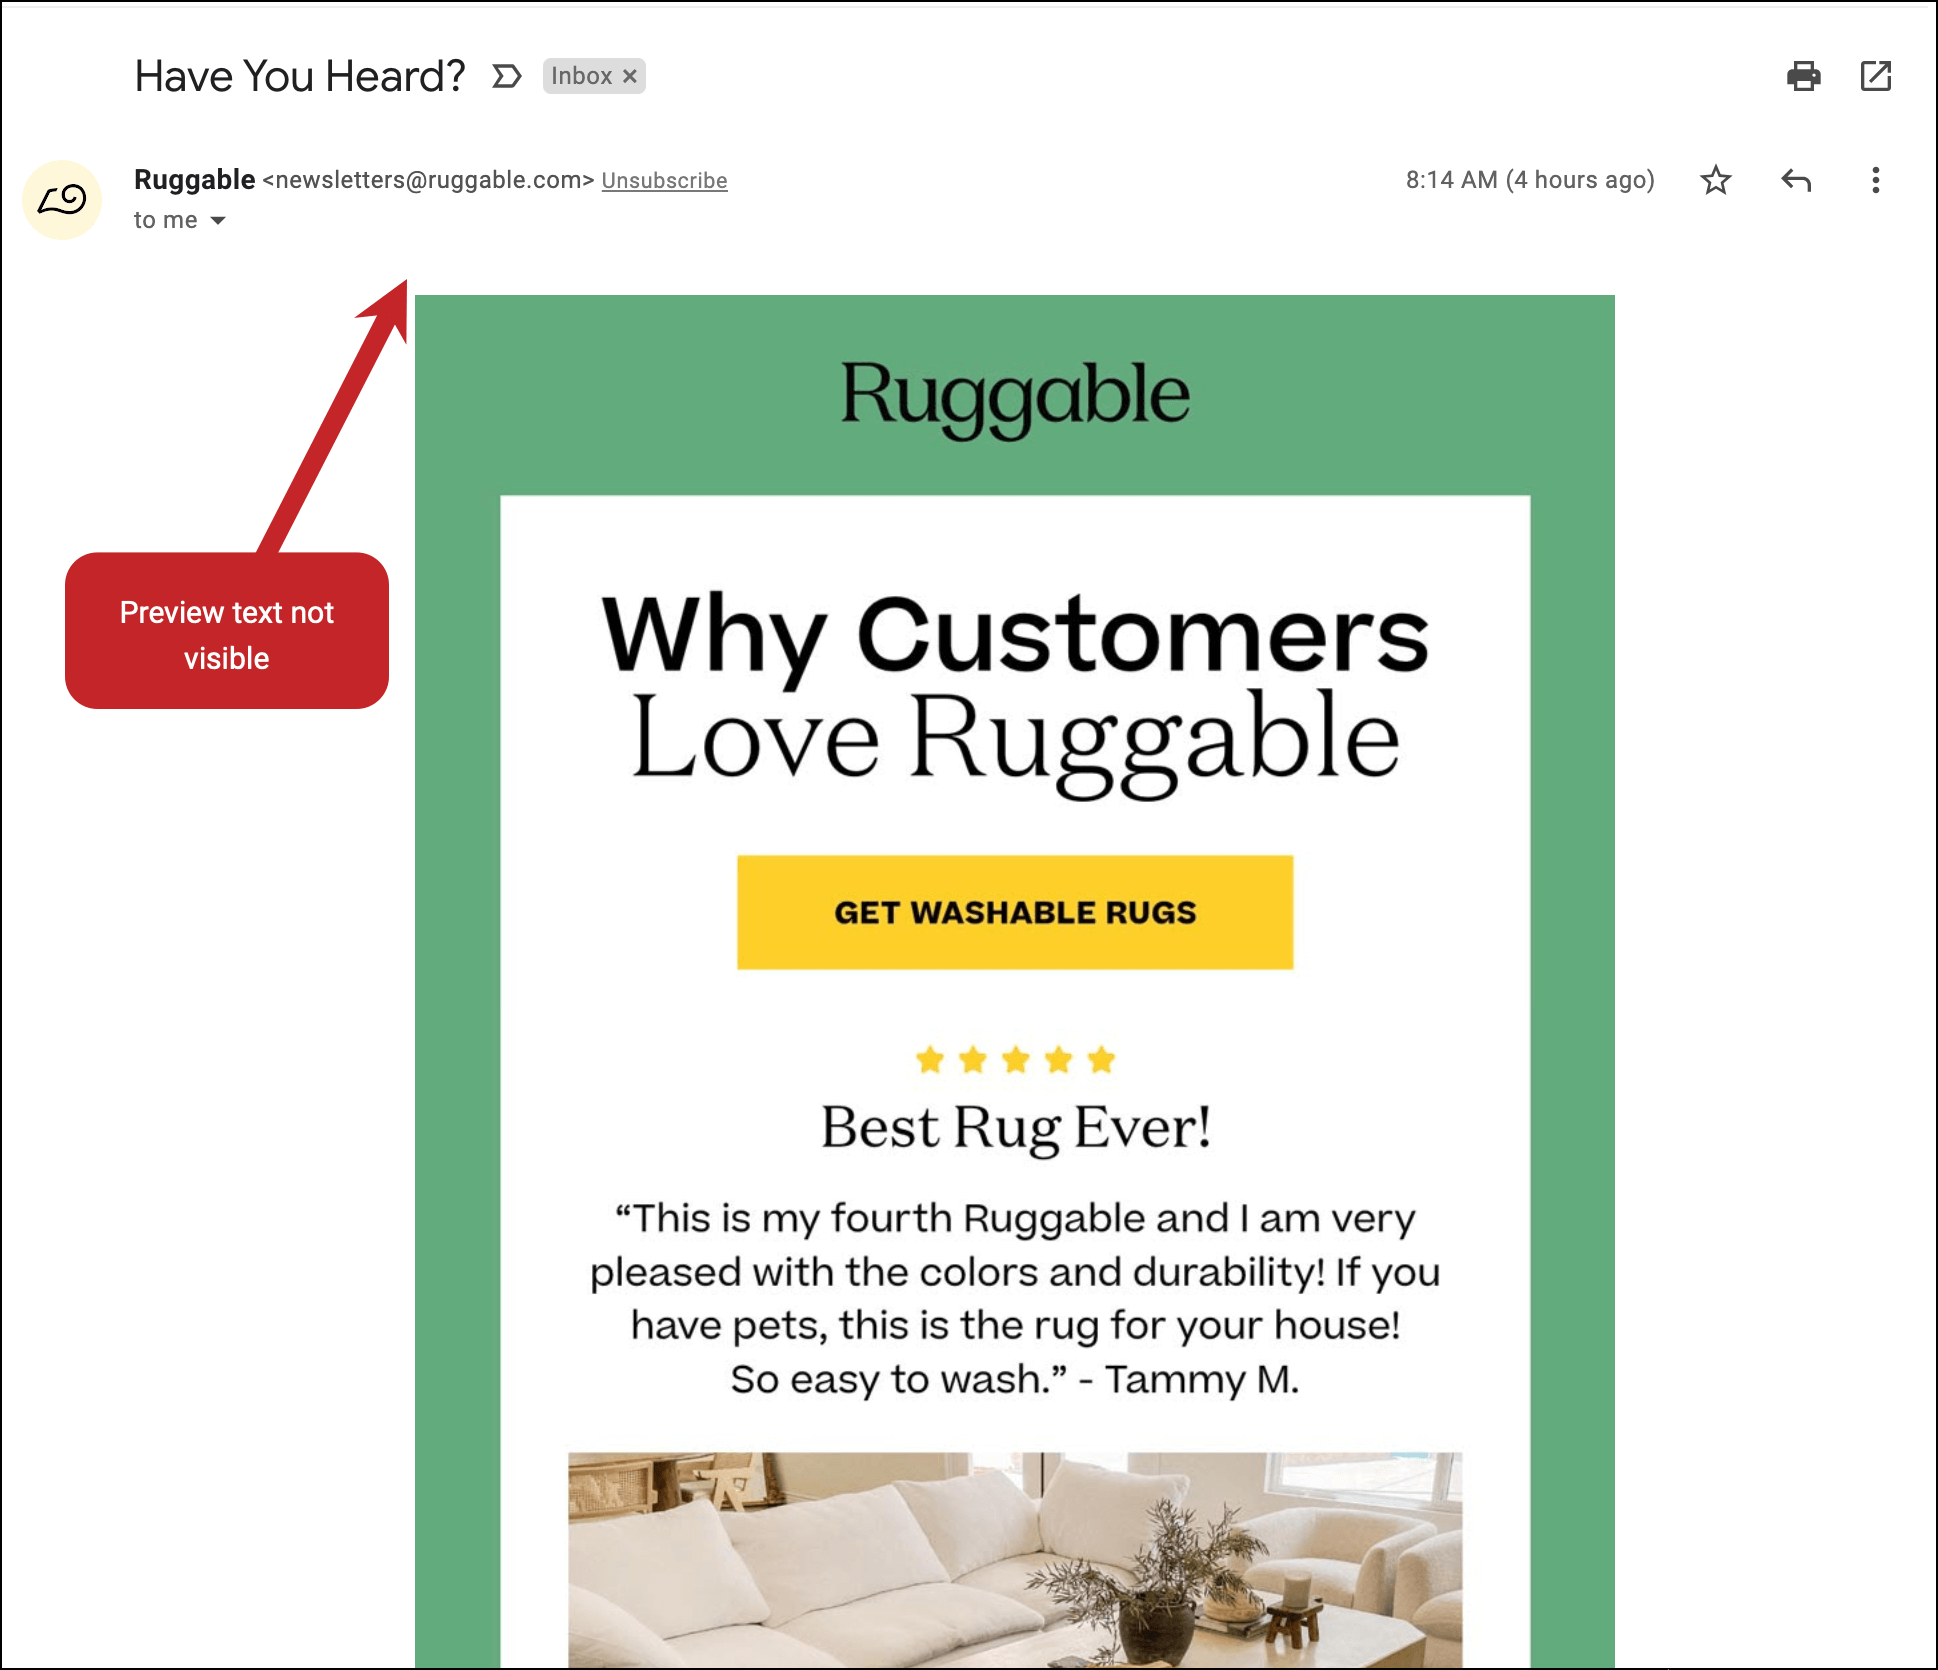 Ruggable email does not display preview text in the body